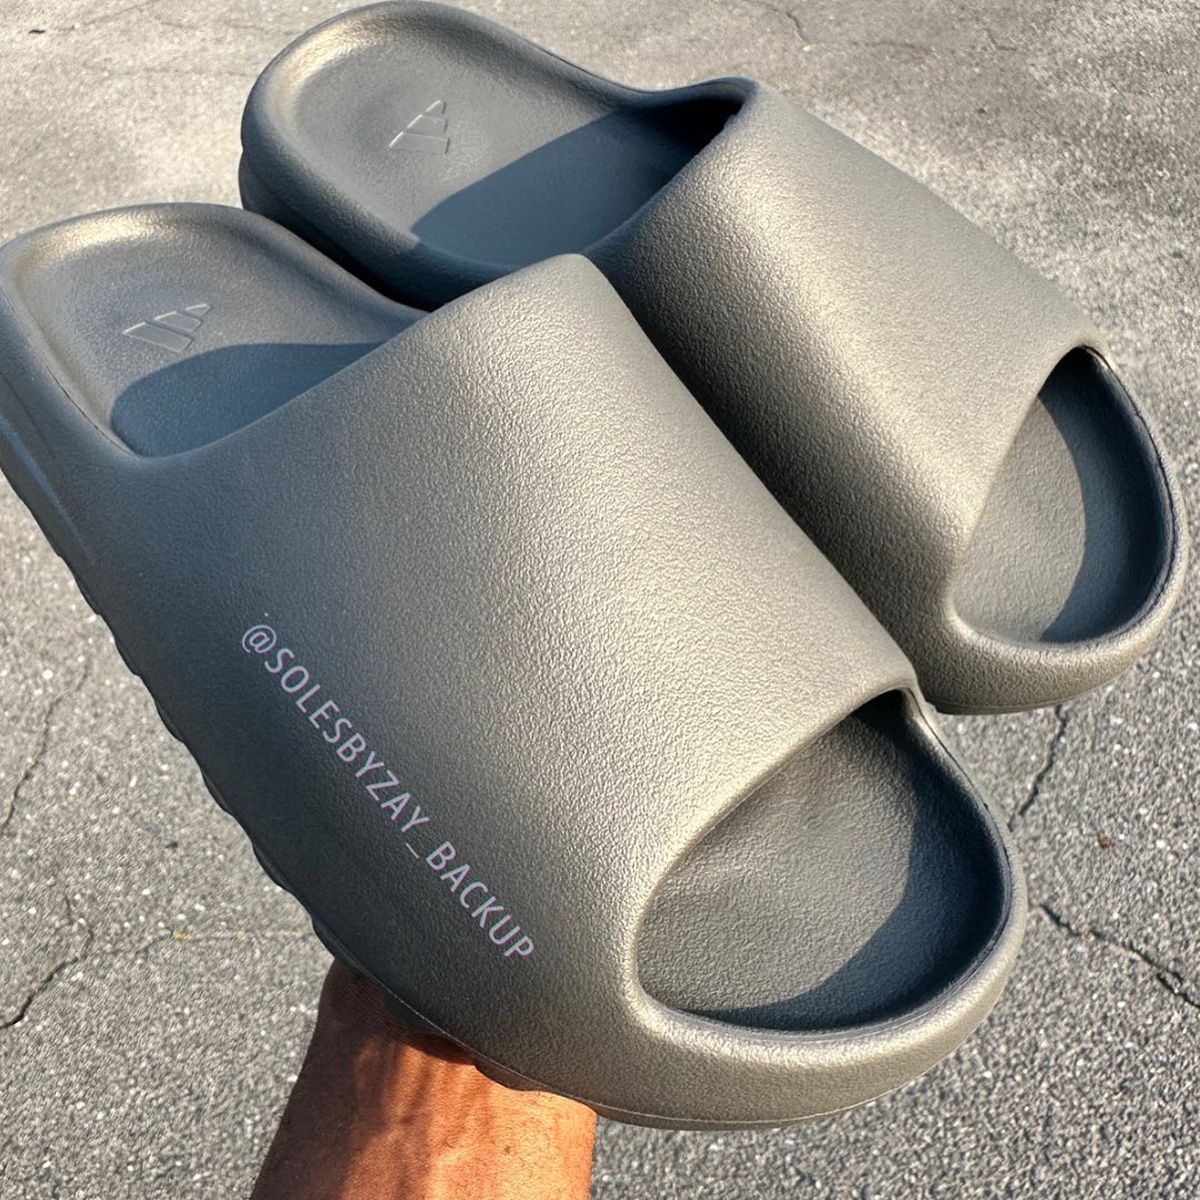 Where to Buy the “Granite” Yeezy Slides | House of Heat°